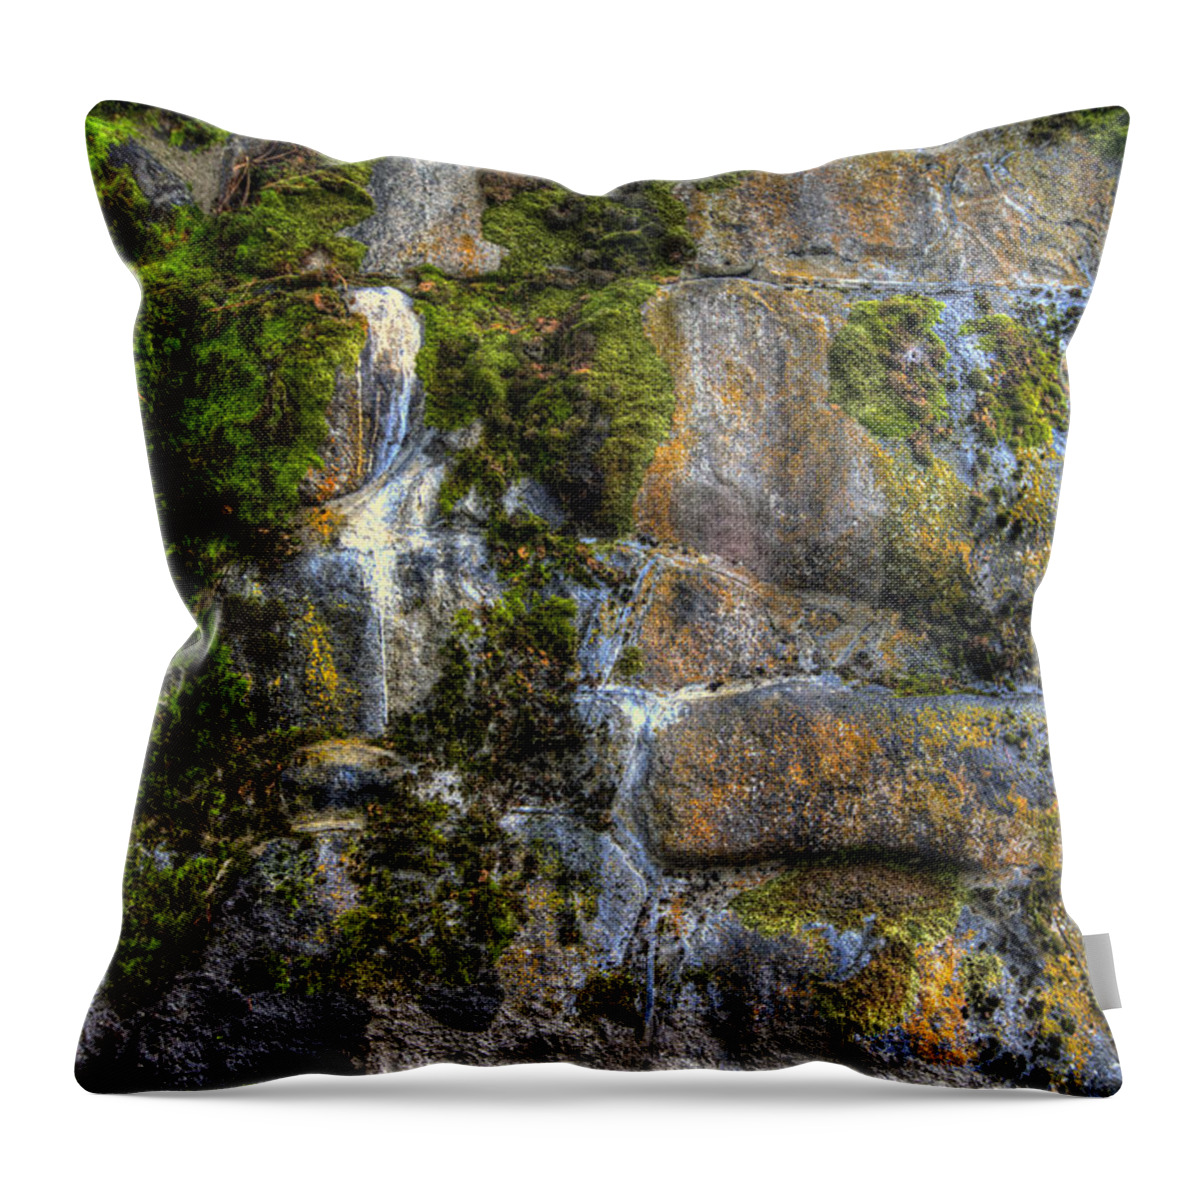 Hdr Throw Pillow featuring the photograph Nature's Abstract by Brad Granger